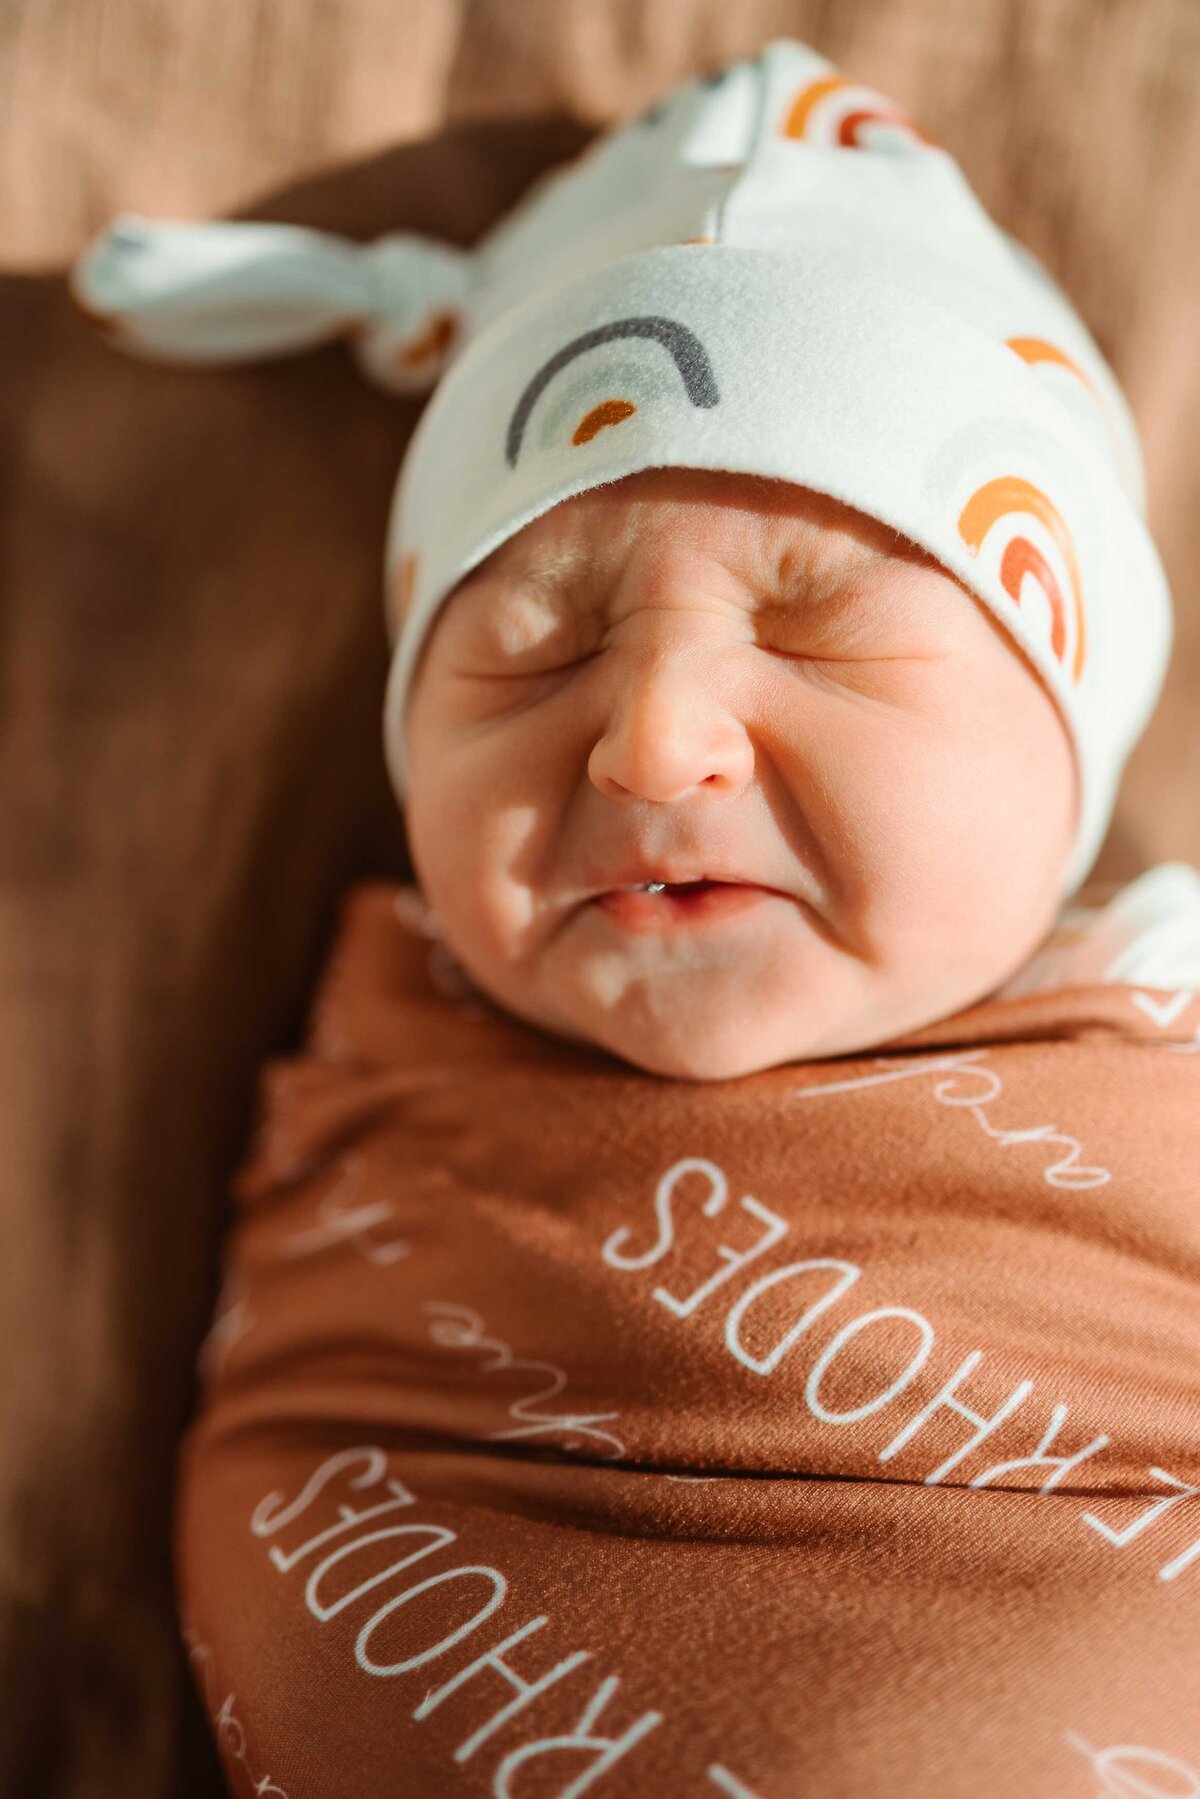 A heartfelt image of a newborn baby crying, wrapped snugly in a soft brown blanket. This touching moment was captured by a top photographer in Albuquerque